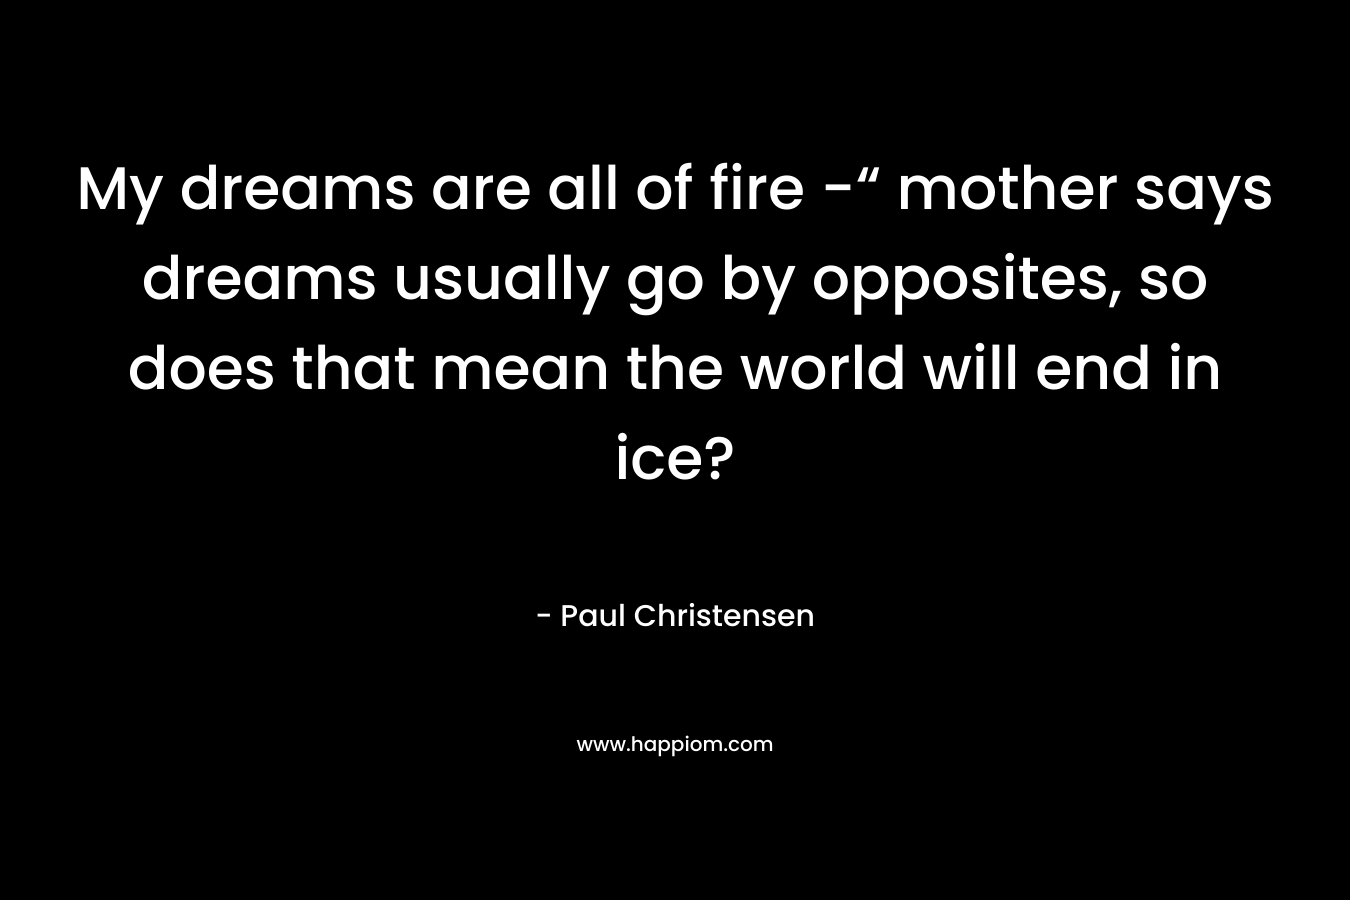 My dreams are all of fire -“ mother says dreams usually go by opposites, so does that mean the world will end in ice?